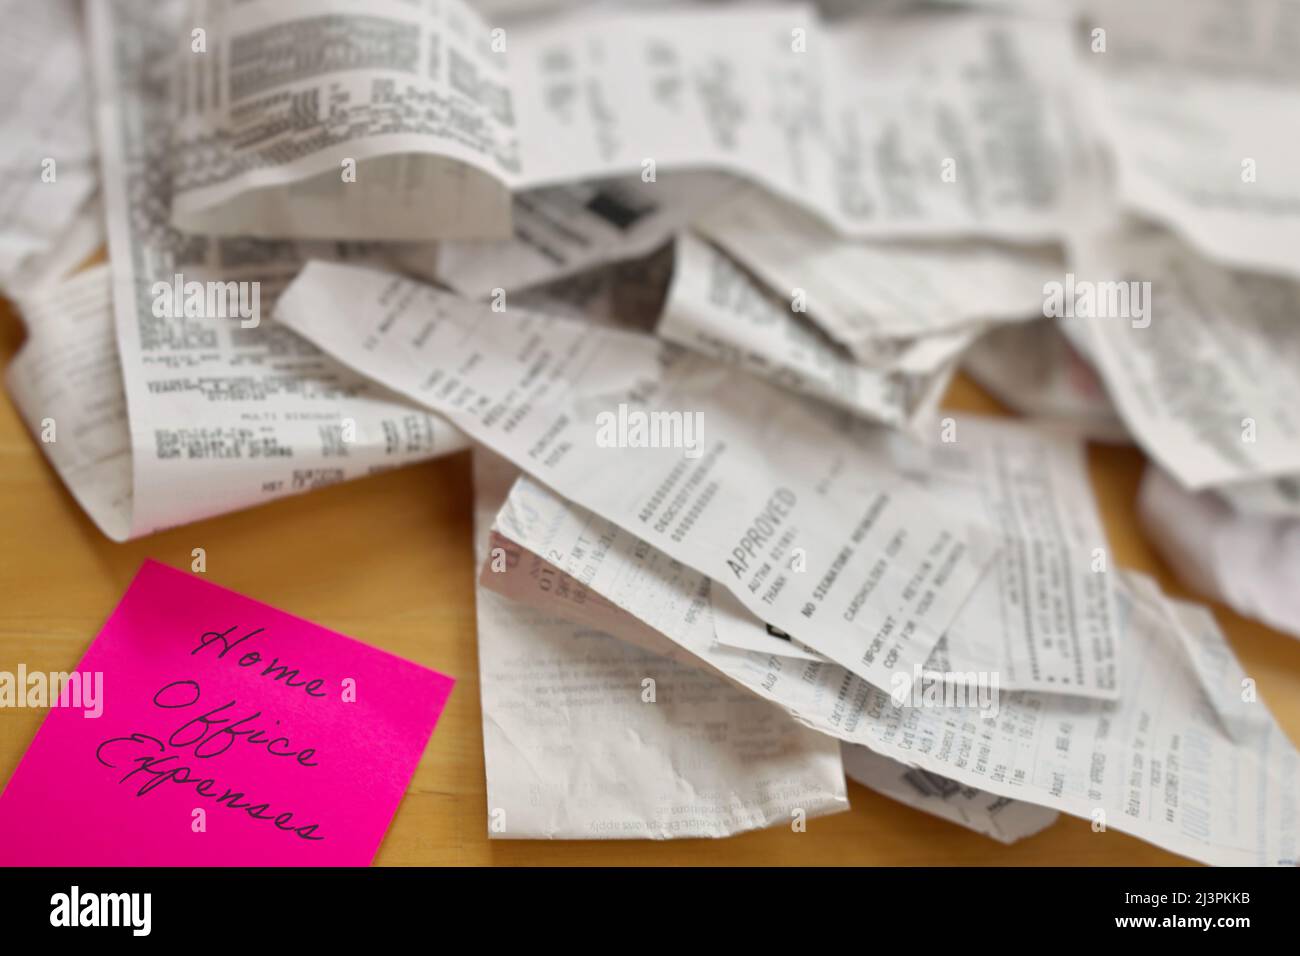 High Angle View of Pile of Receipts with Home Office Expenses Pink Sticky Note on Table Stock Photo